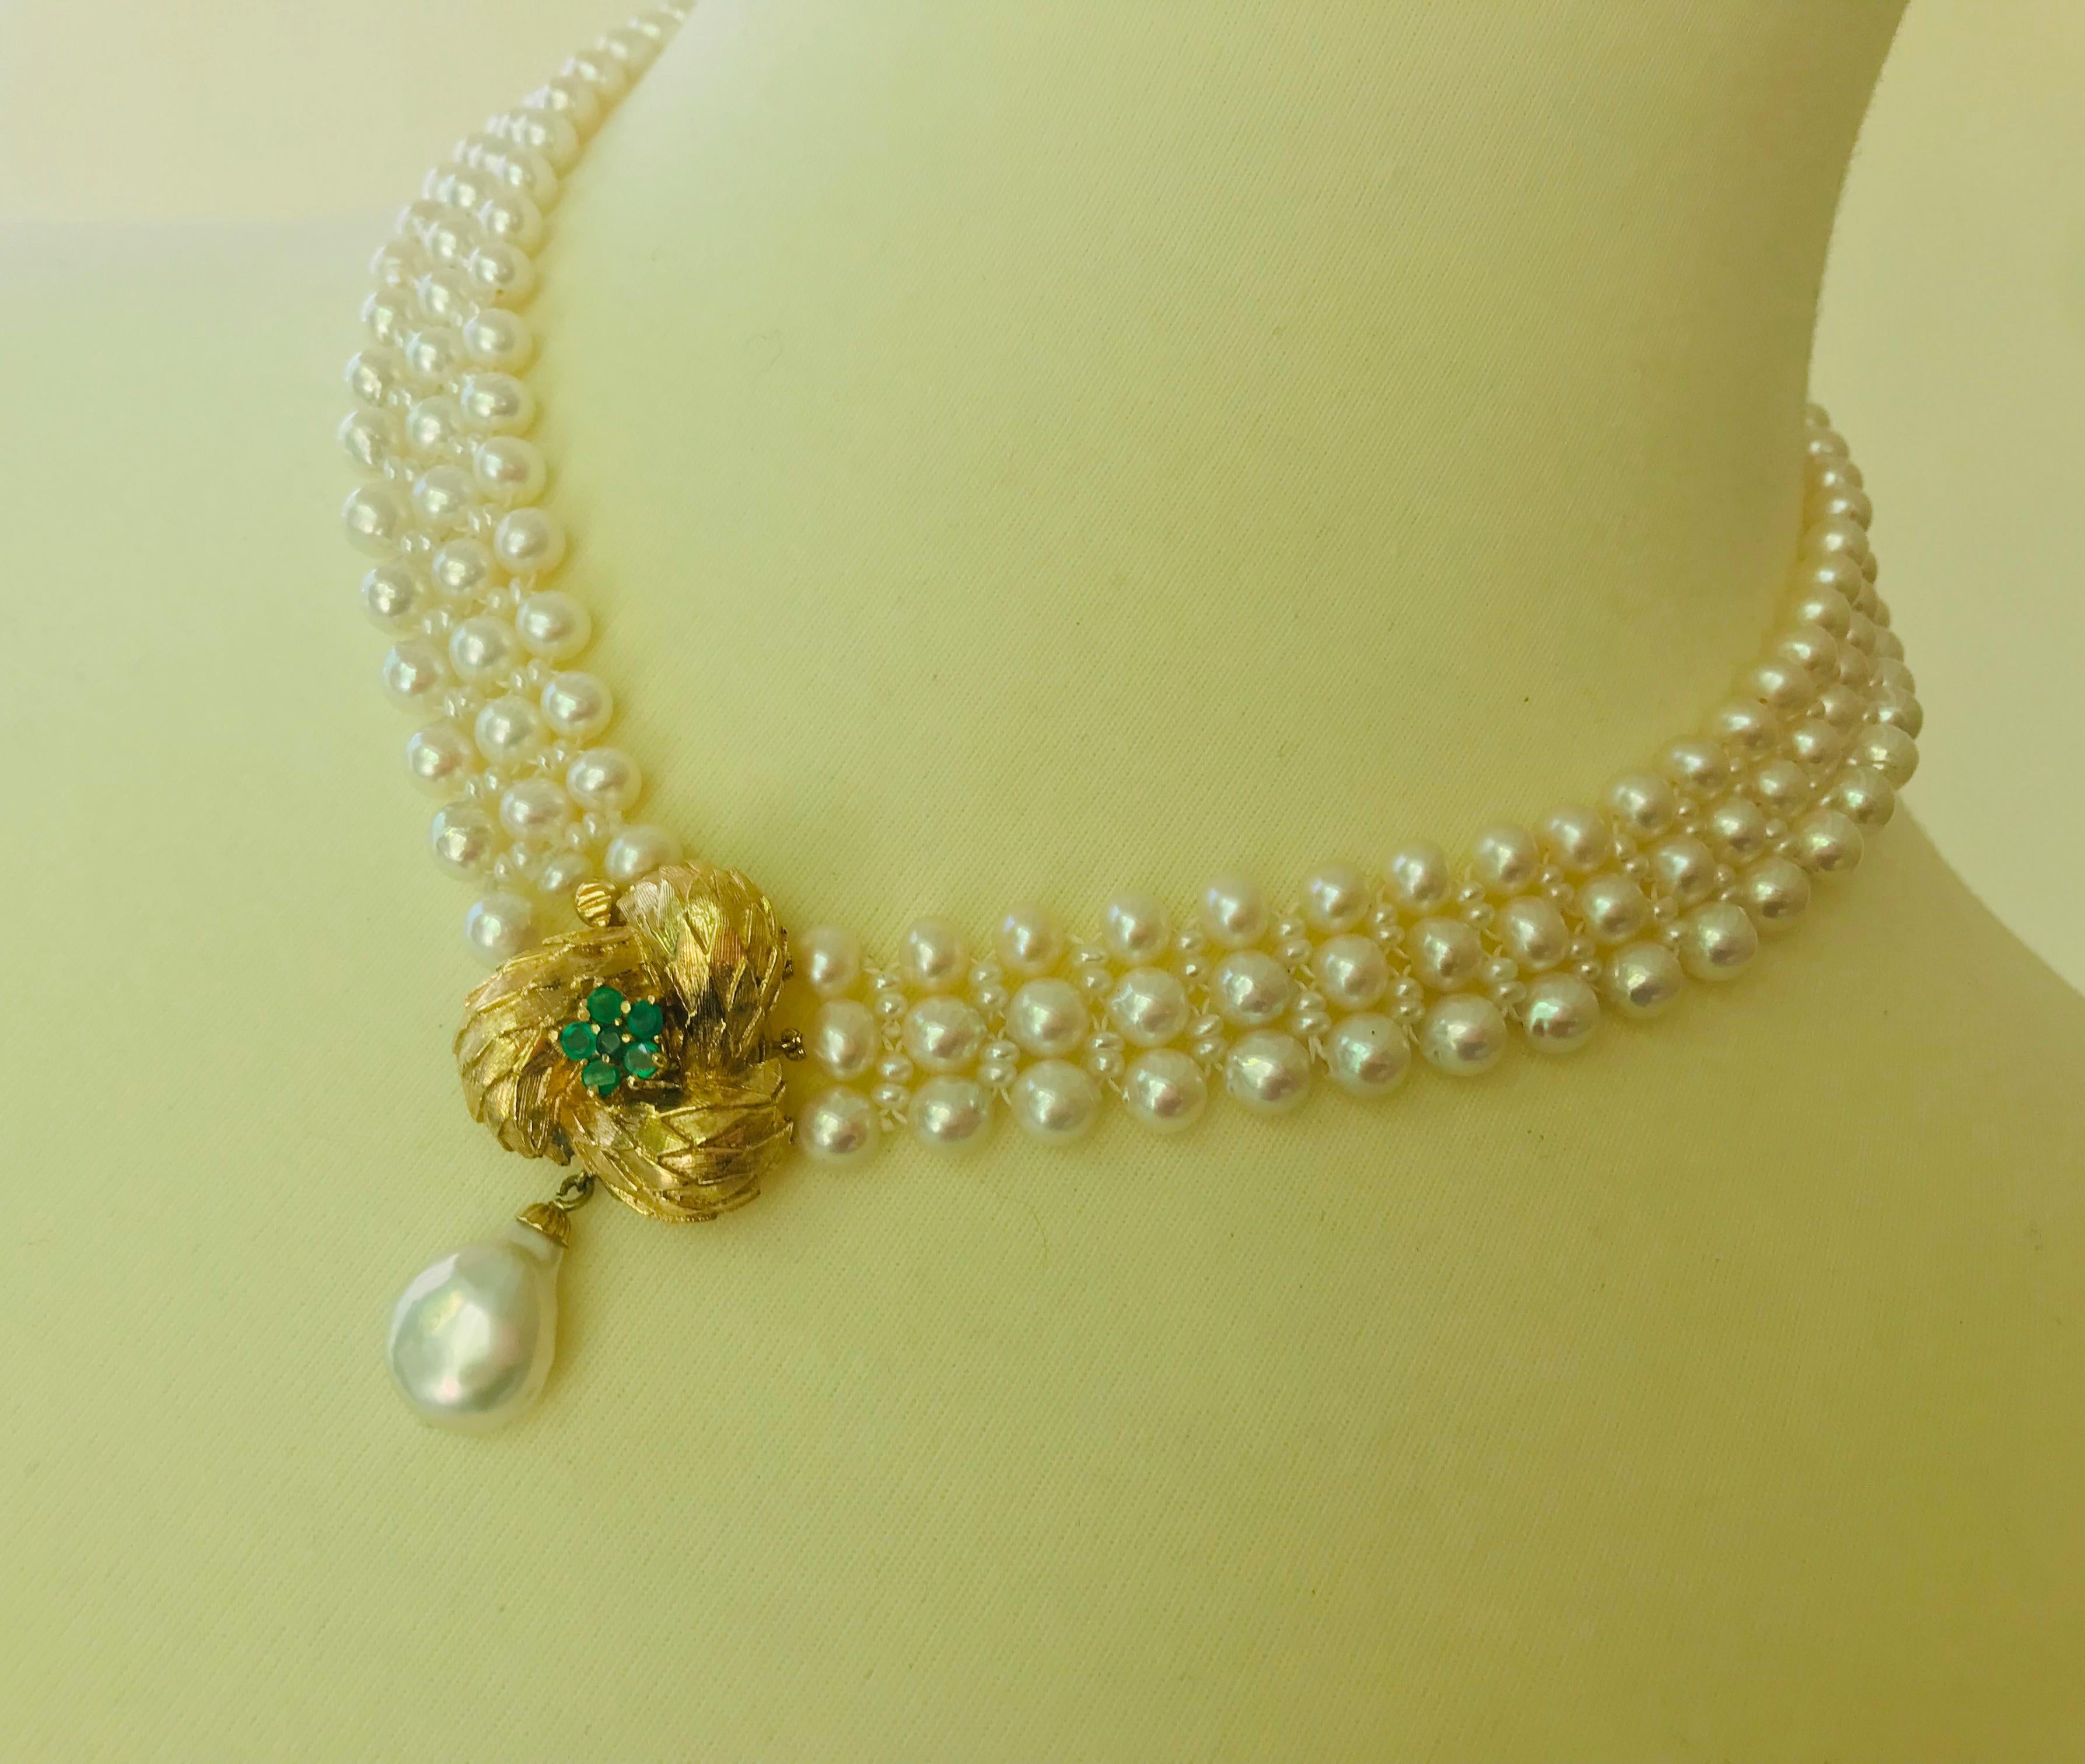 Marina J. Pearl Necklace with Vintage 14k Yellow Gold and Emerald Center-Clasp For Sale 1